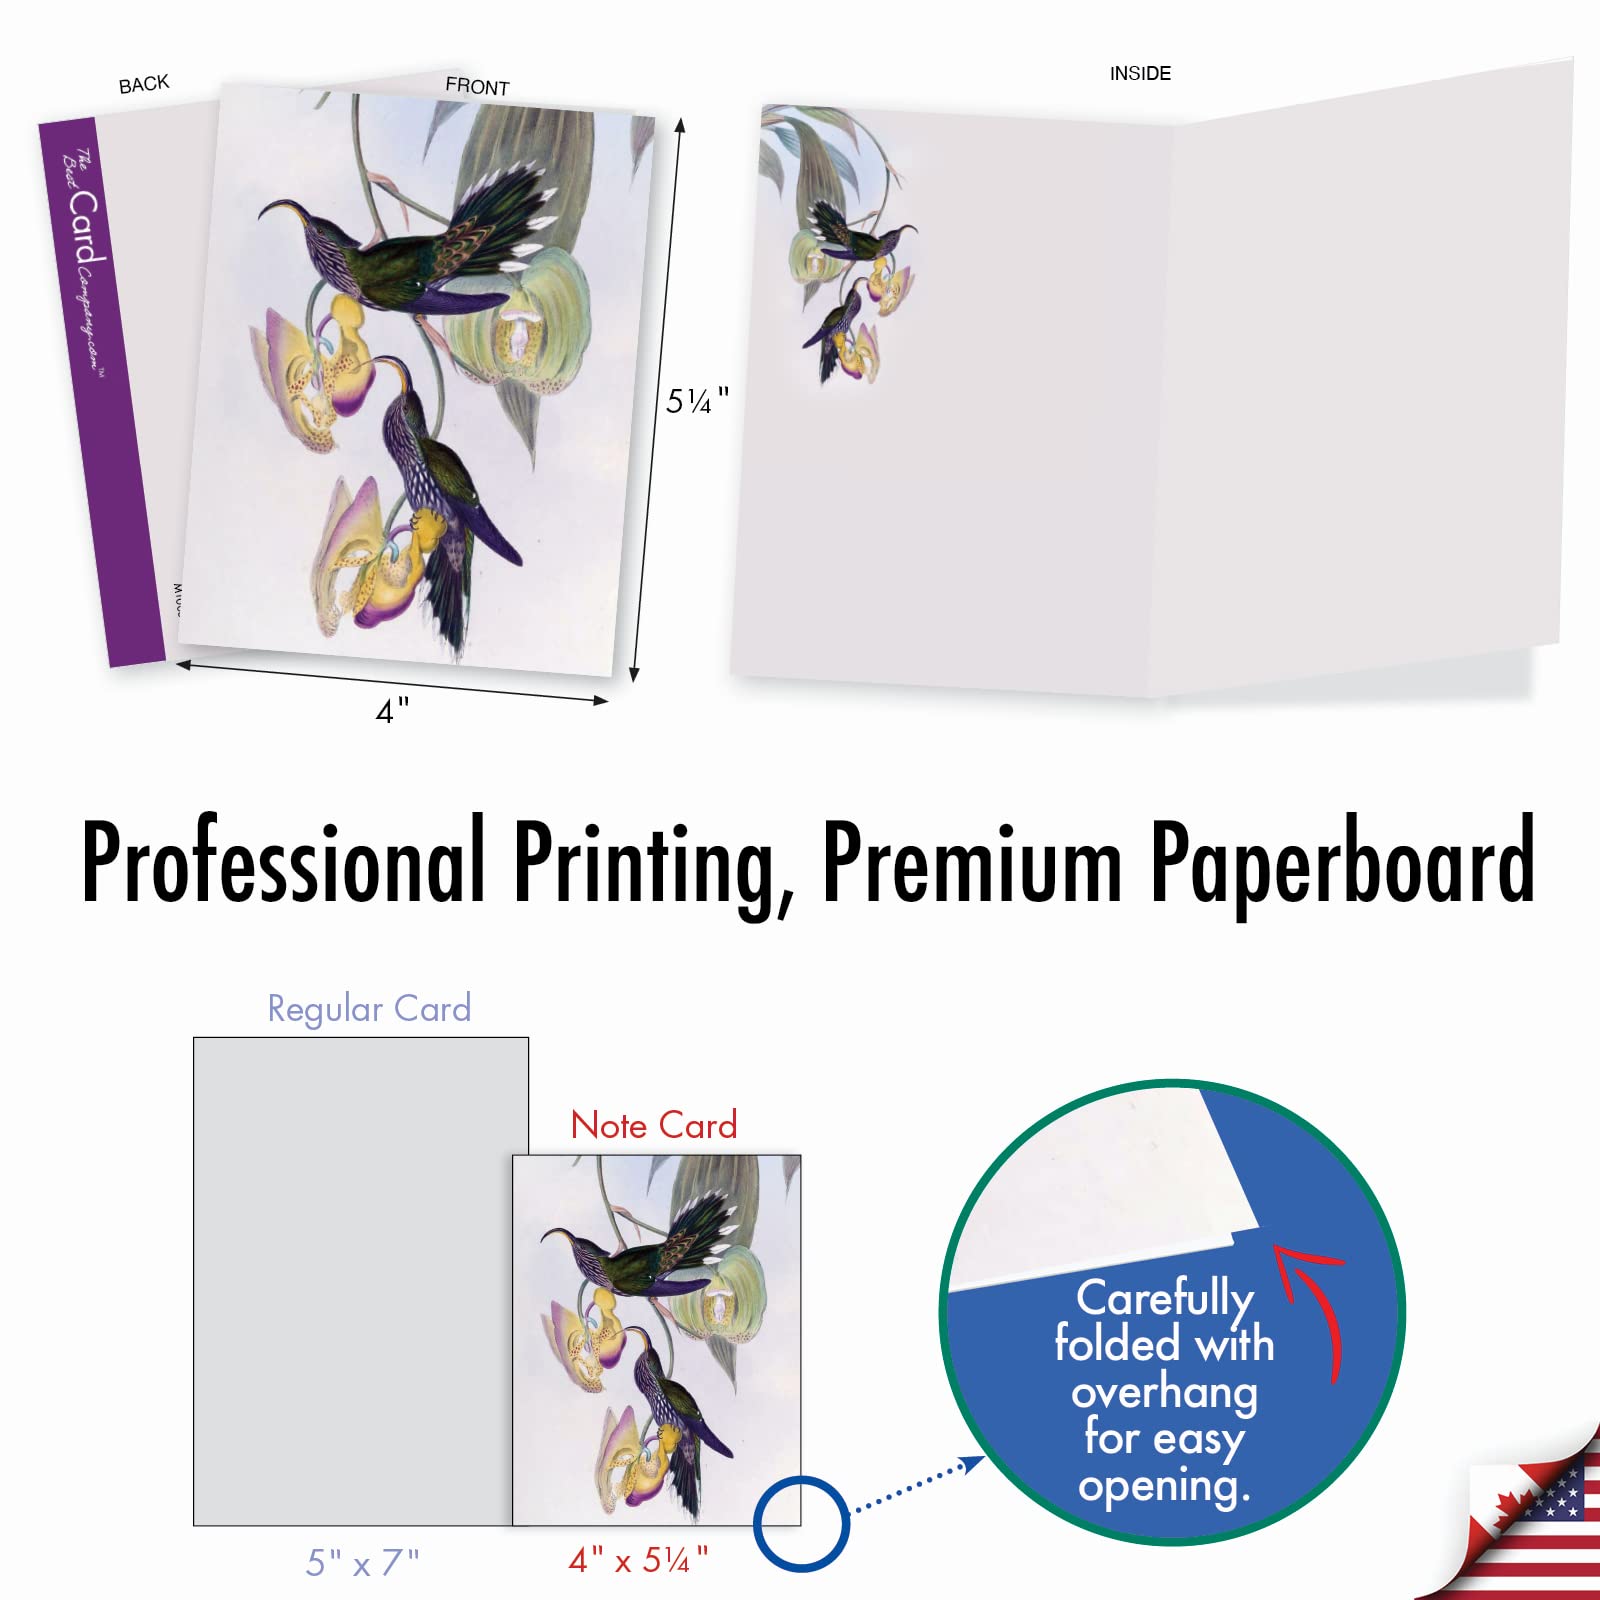 The Best Card Company - 10 Bird Note Cards Blank (4 x 5.12 Inch) - All Occasion Cards with Envelopes, Boxed Set - Humming Along M10034BK